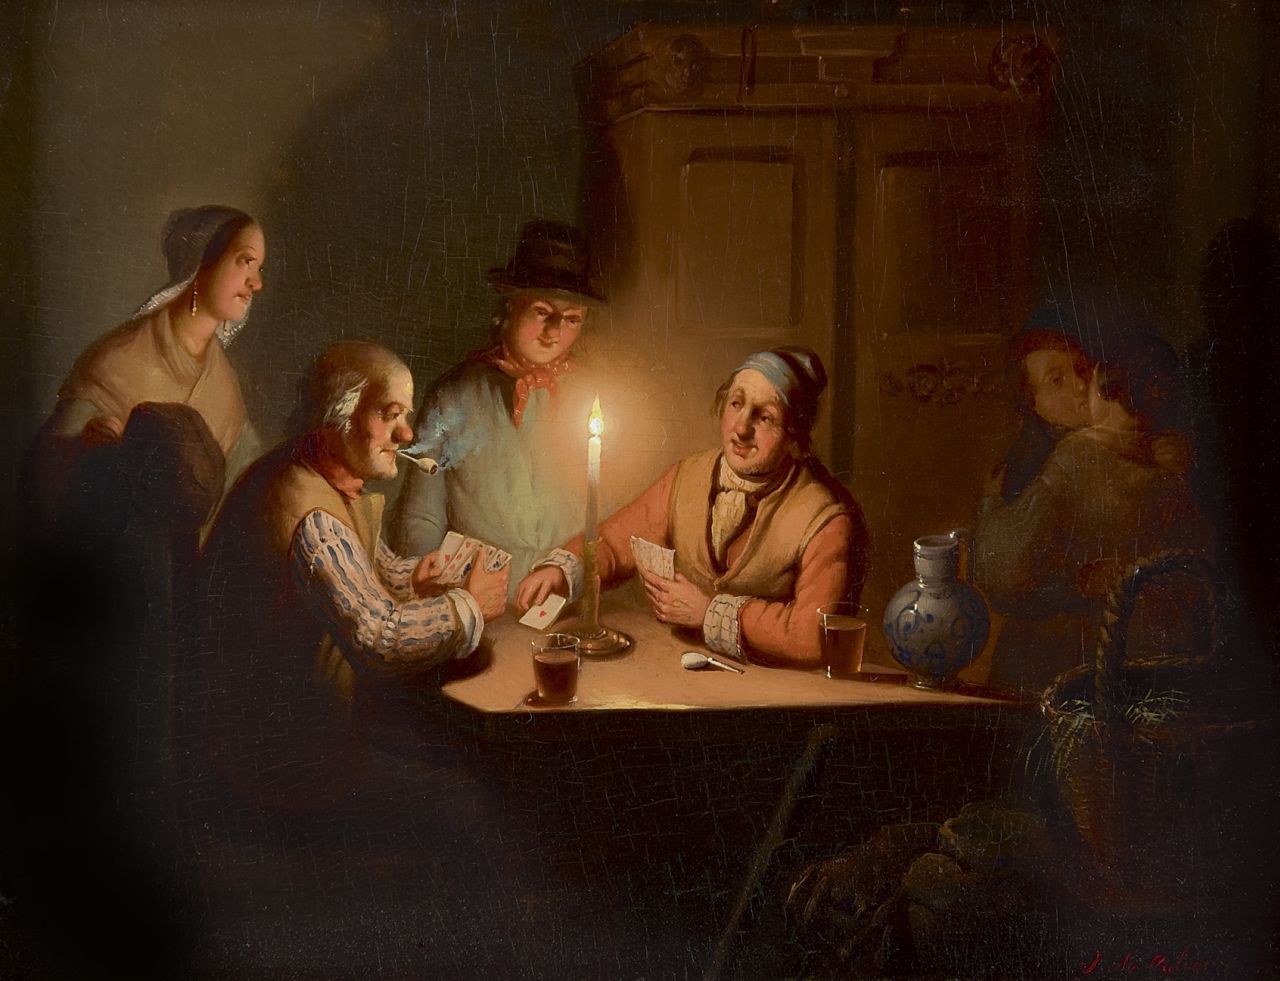 Culverhouse J.M.  | Johan Mengels Culverhouse, Card players by candlelight, oil on panel 23.6 x 31.2 cm, signed l.r.